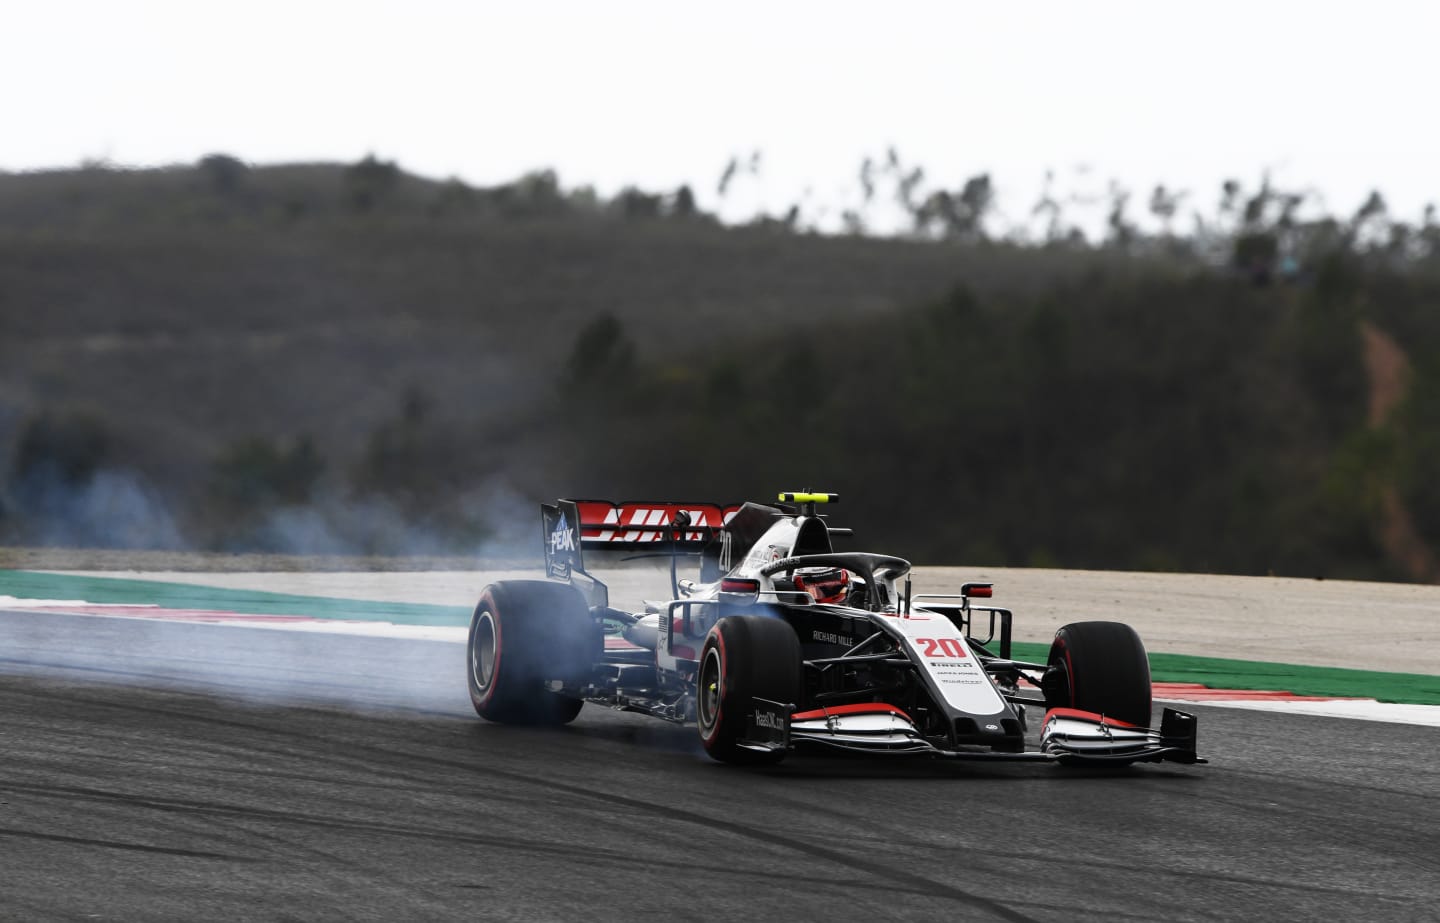 PORTIMAO, PORTUGAL - OCTOBER 25: Kevin Magnussen of Denmark driving the (20) Haas F1 Team VF-20 Ferrari on track during the F1 Grand Prix of Portugal at Autodromo Internacional do Algarve on October 25, 2020 in Portimao, Portugal. (Photo by Rudy Carezzevoli/Getty Images)